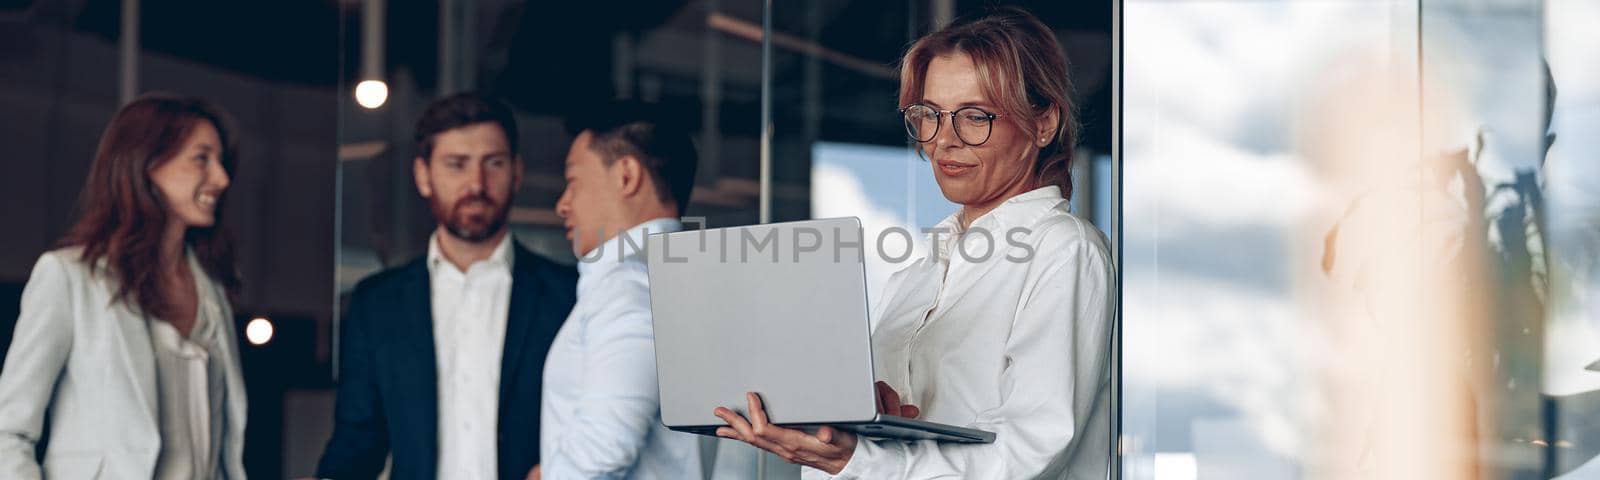 Mature confident businesswoman at office with group of colleagues on background, working on laptop.